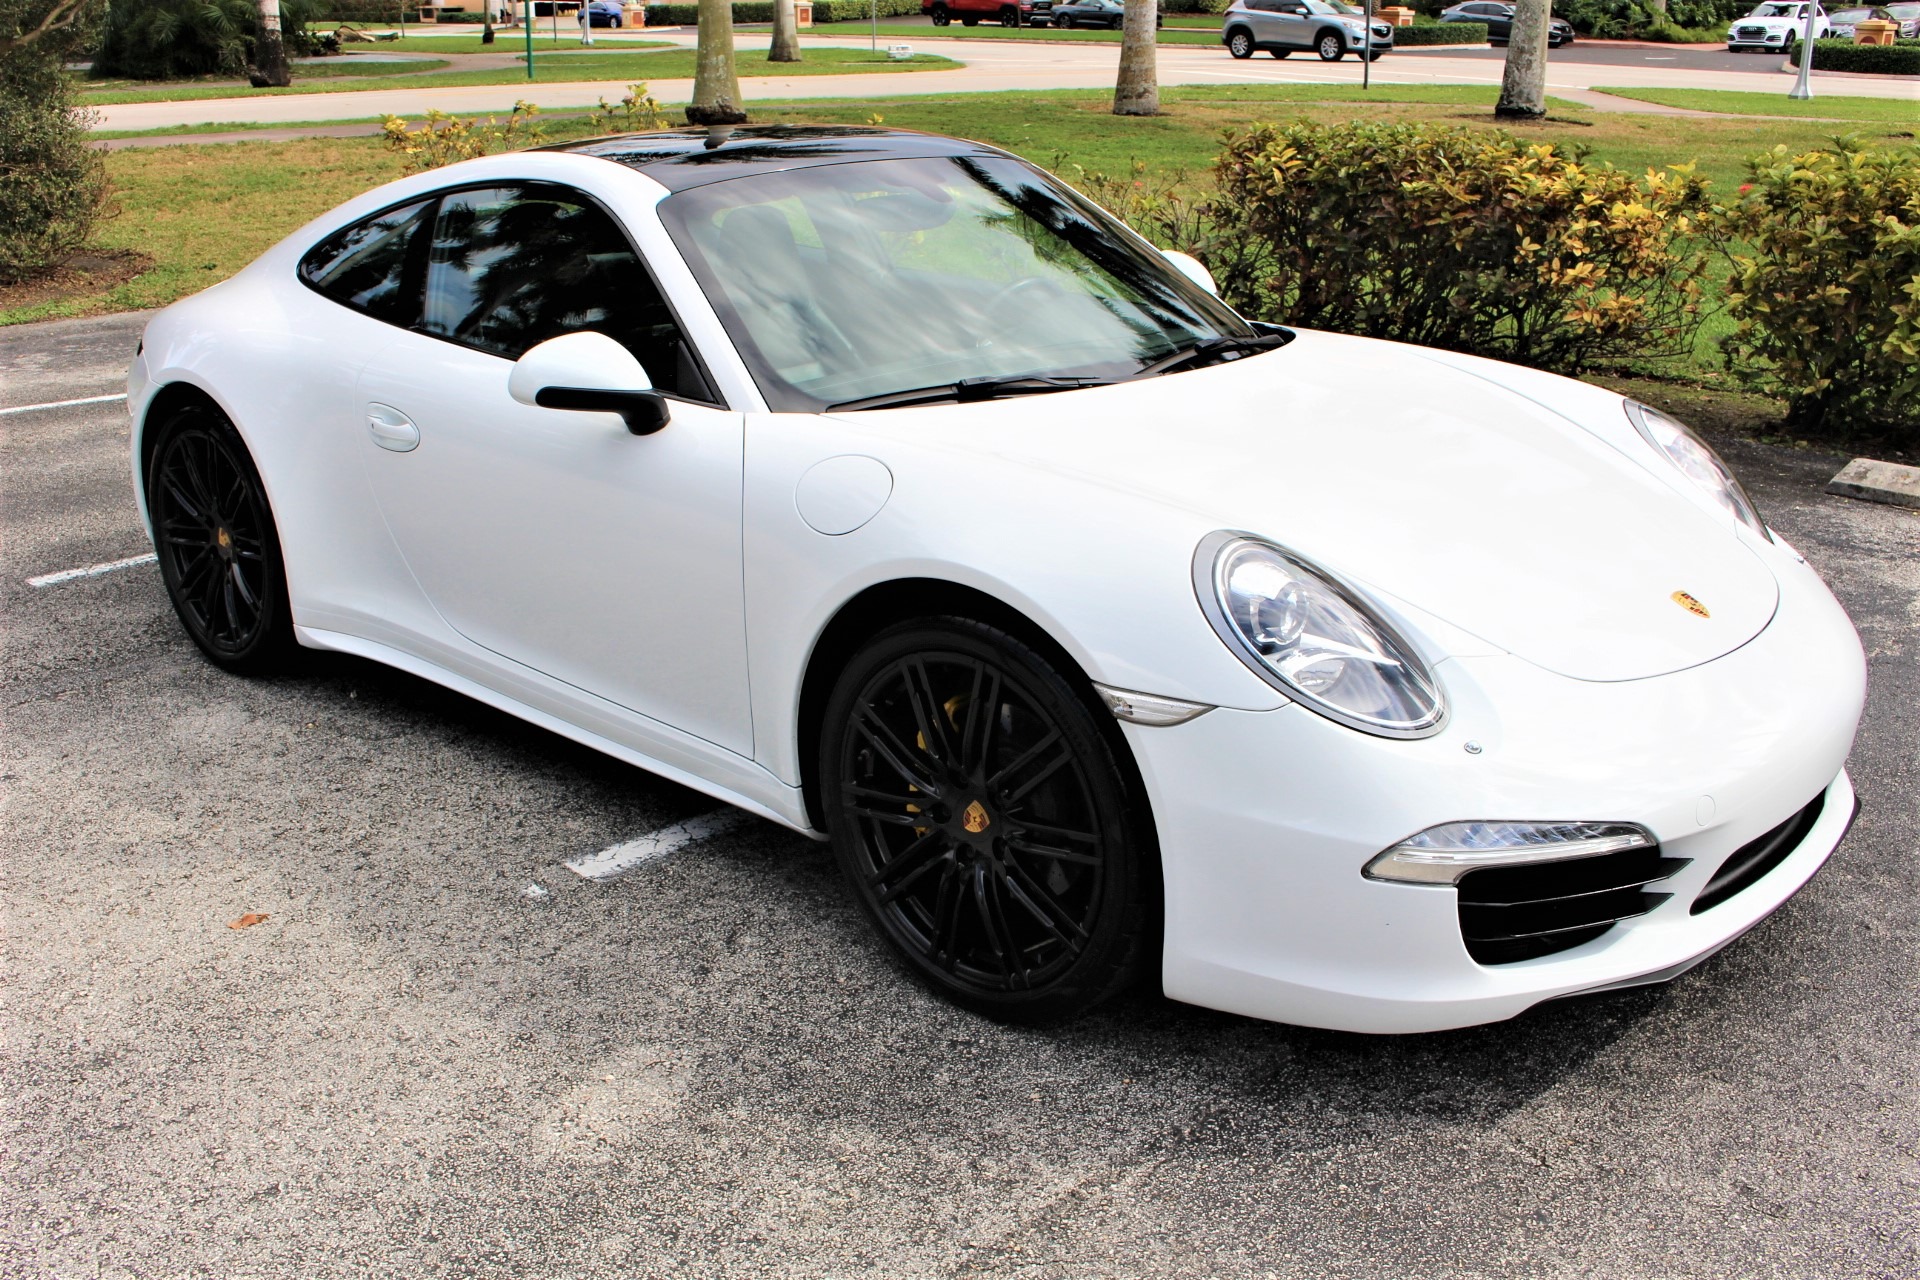 Used 2013 Porsche 911 Carrera 4 for sale Sold at The Gables Sports Cars in Miami FL 33146 4